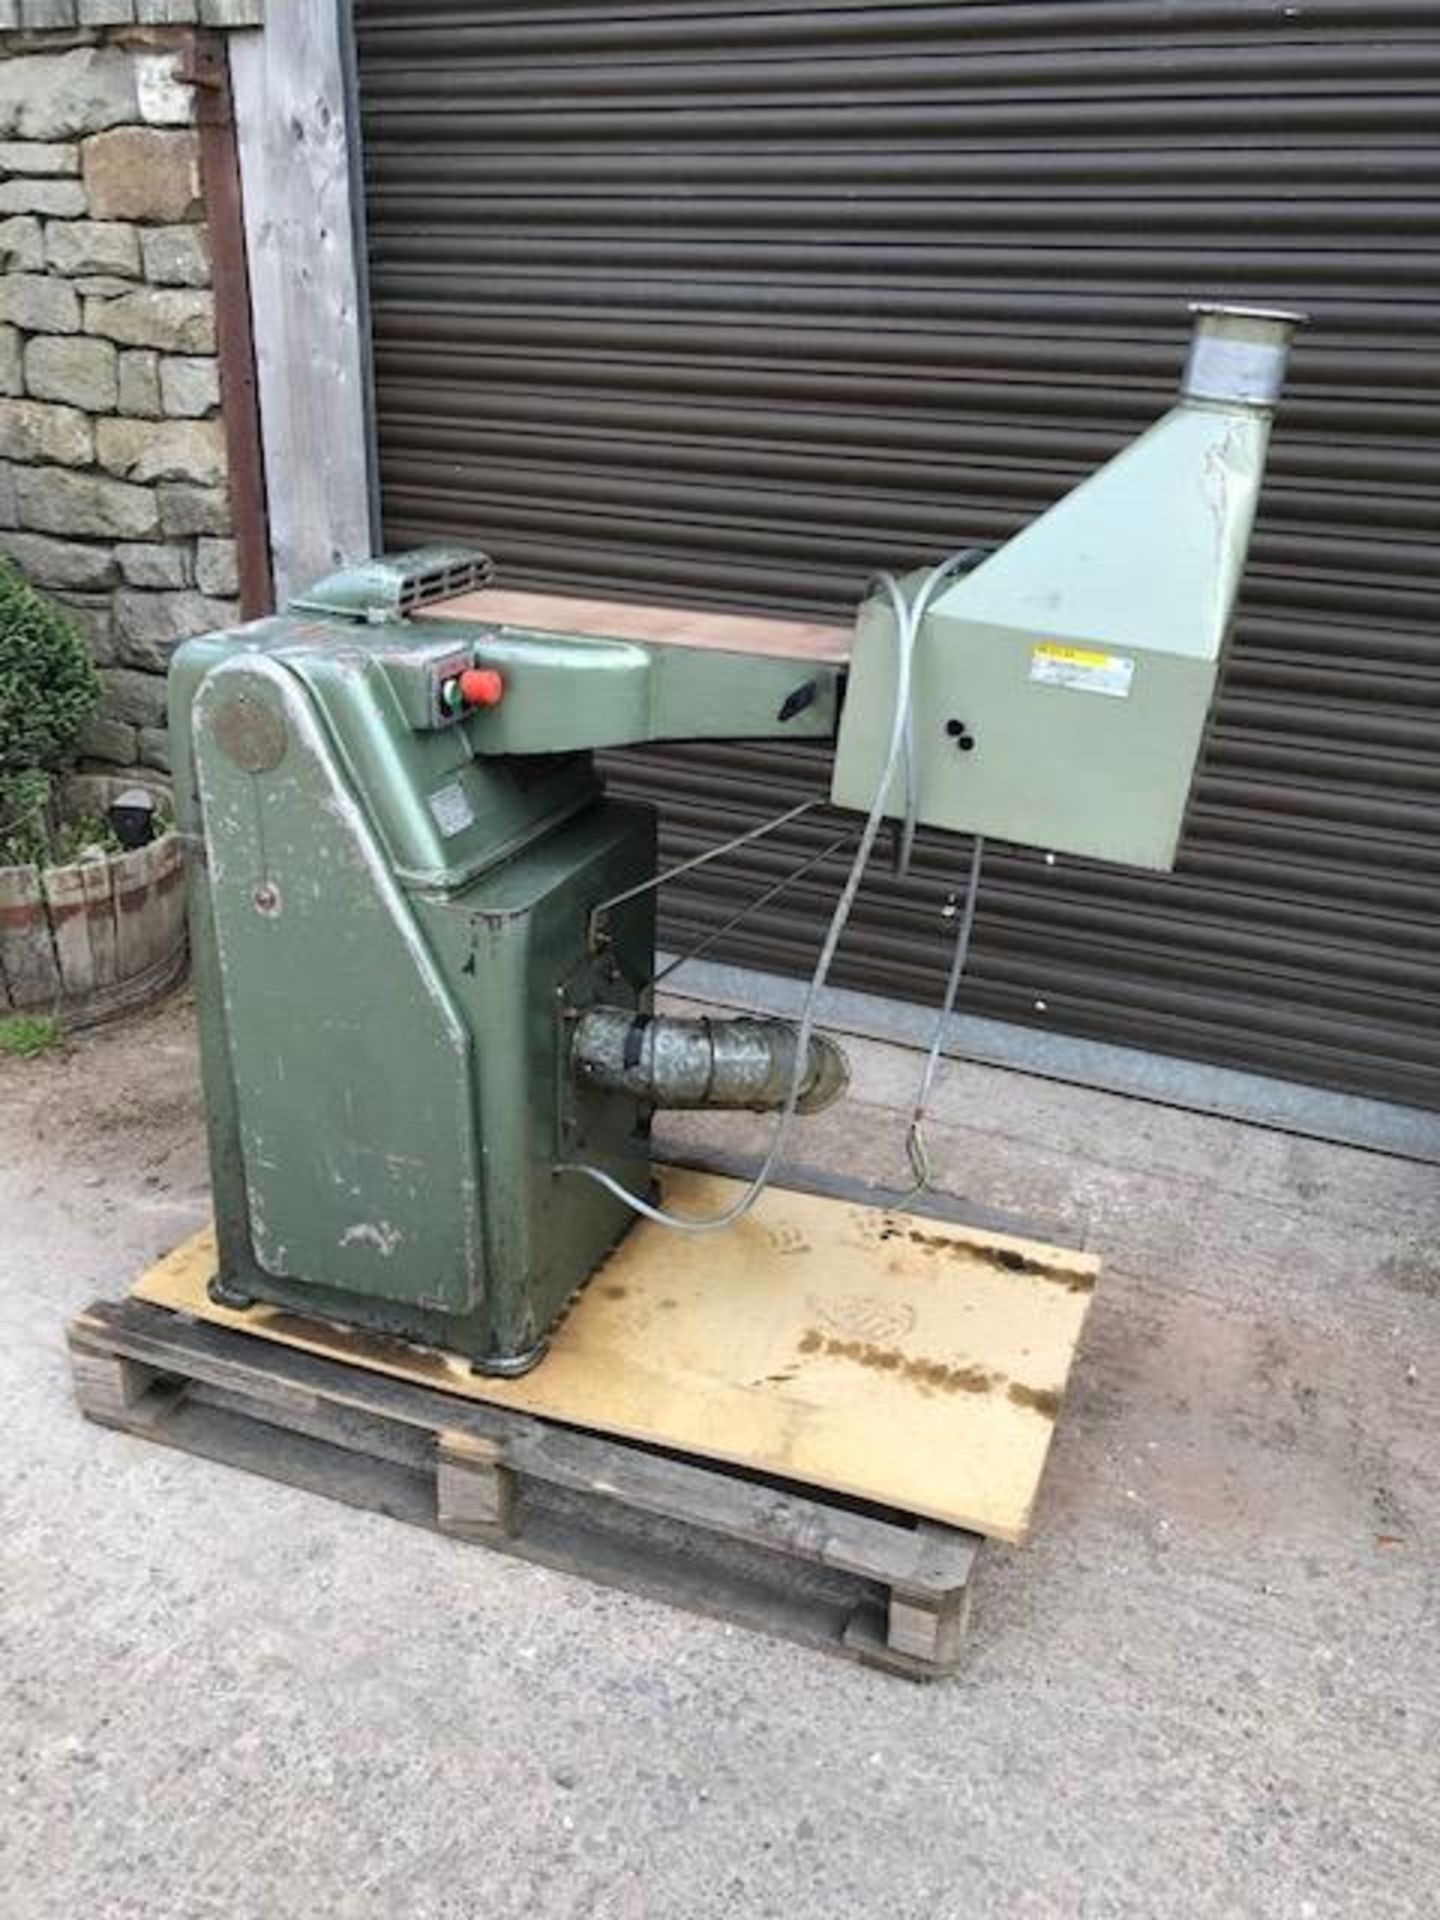 Cooksley Belt Linisher, with dust shoot (vendors comments - good condition), lot location -